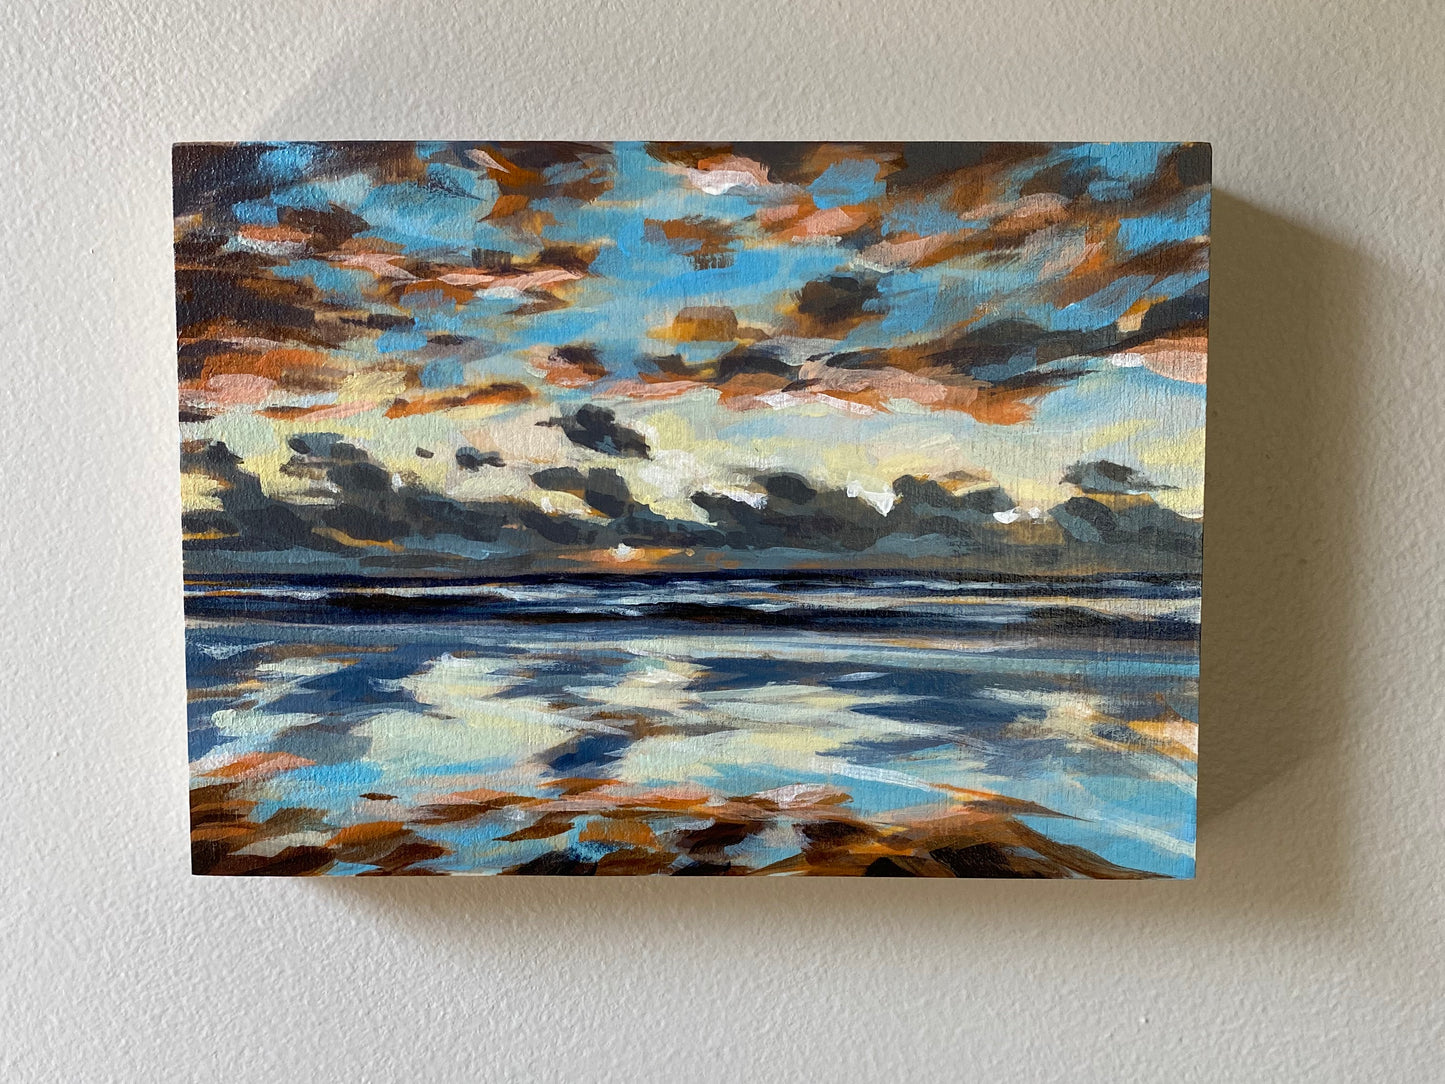 Original 7x5 Acrylic painting of Pacific Northwest Pink Coast Sunset and Clouds. Clouds with blue sky acrylic painting.